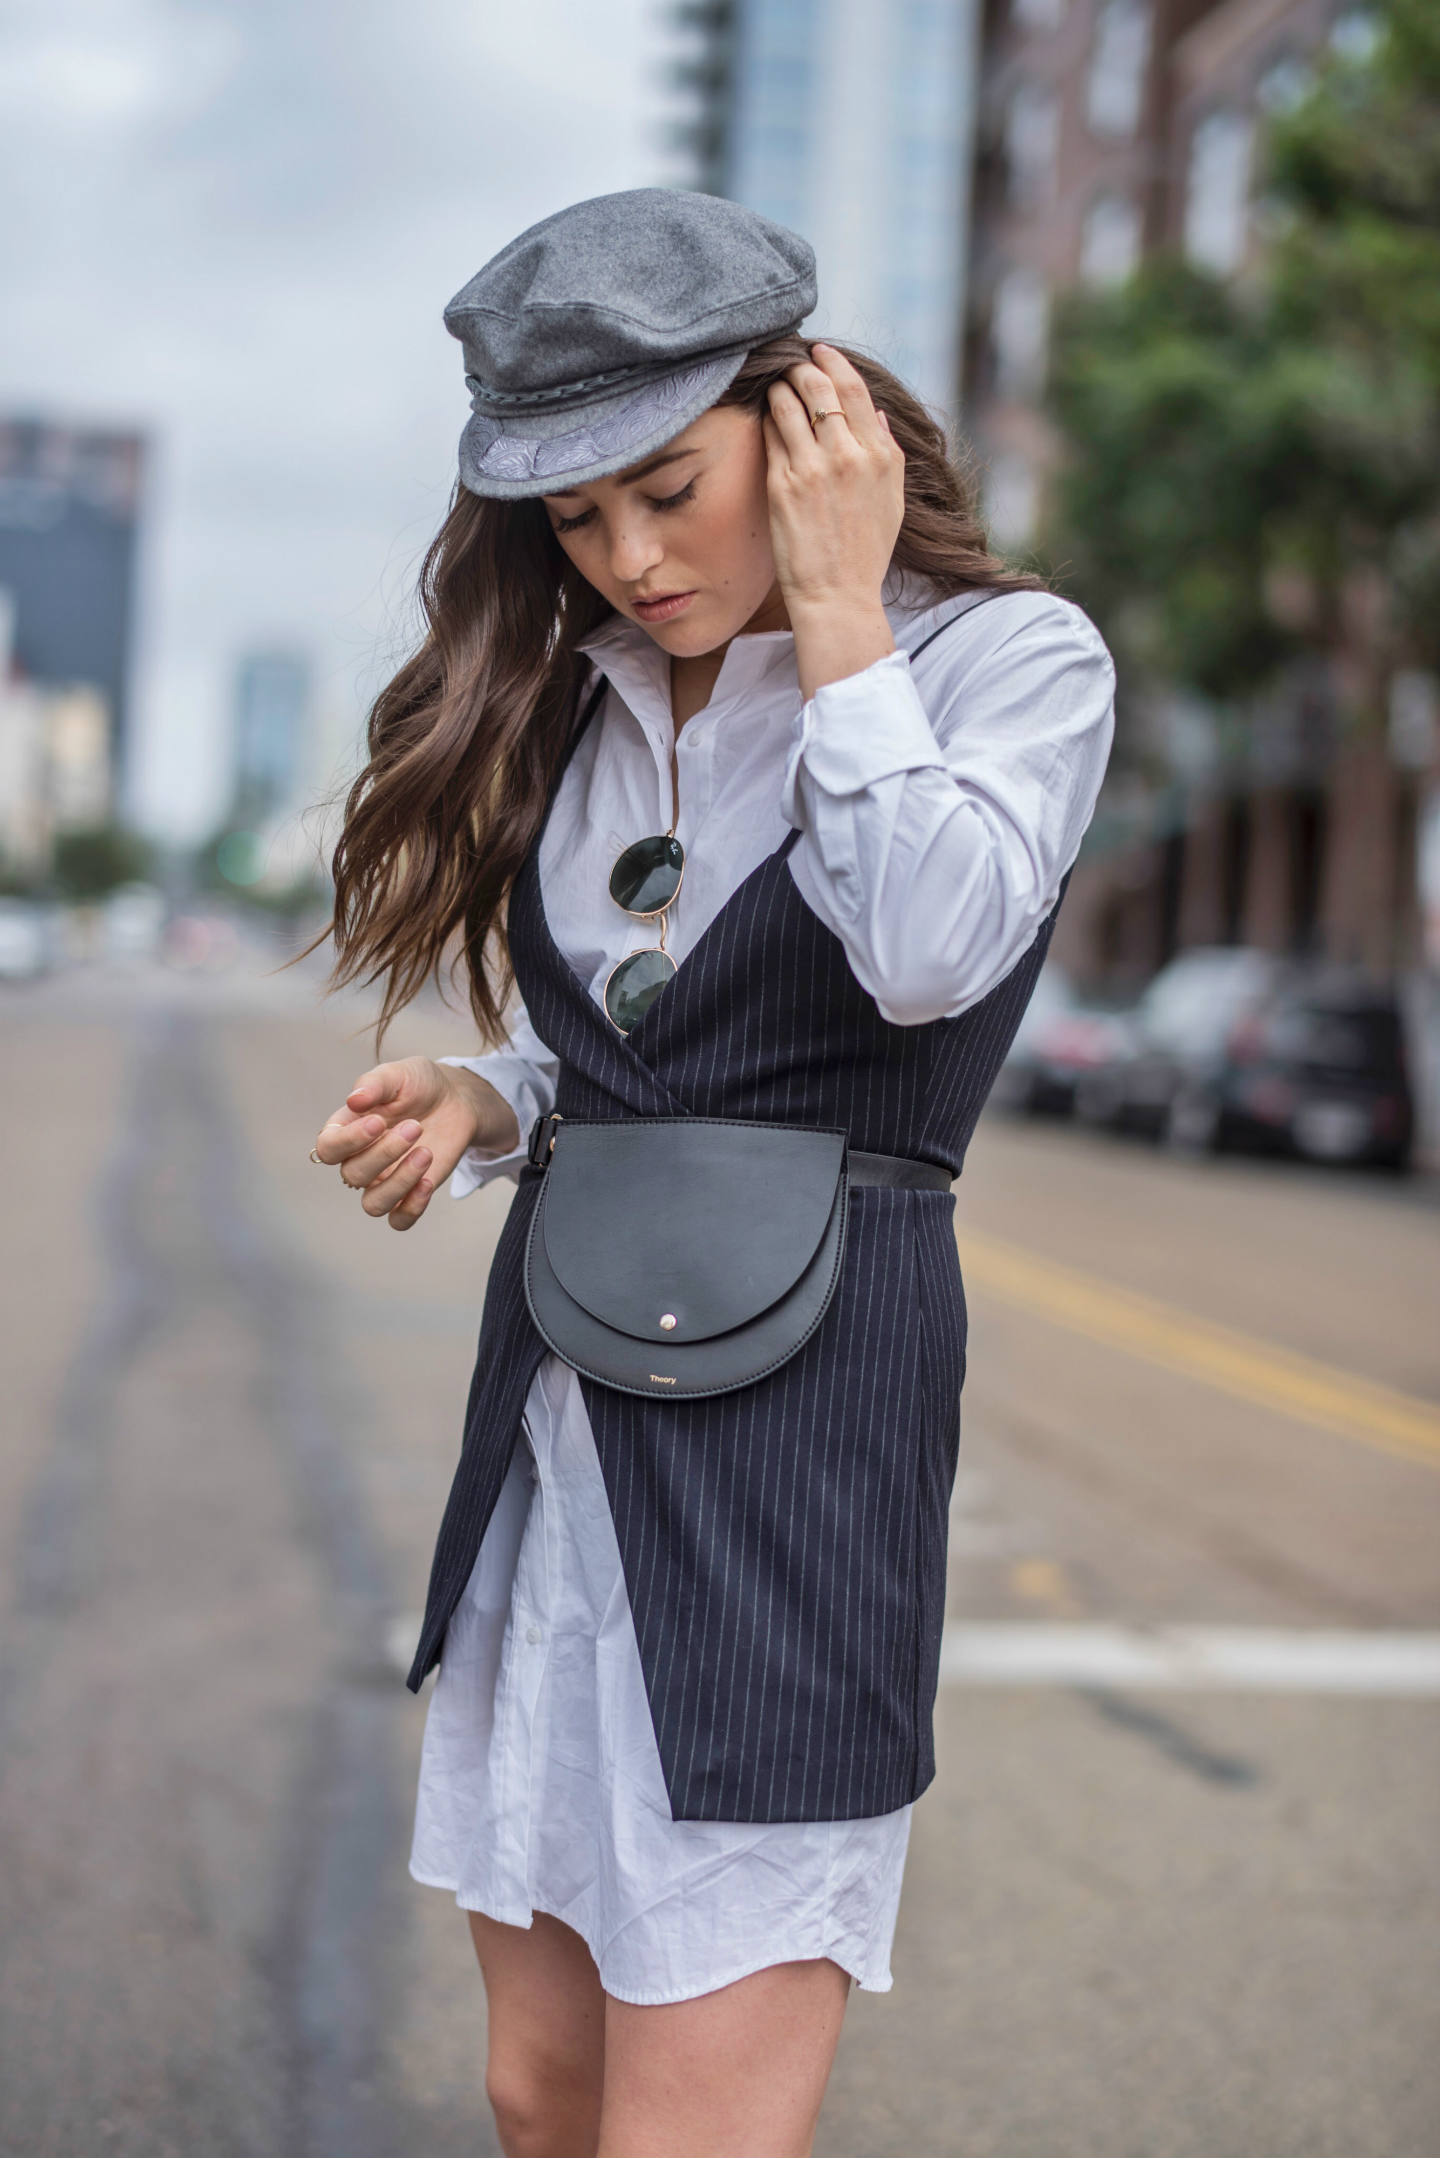 Wear Luxury On-The-Go With Stylish Fanny Packs From NOTIQ